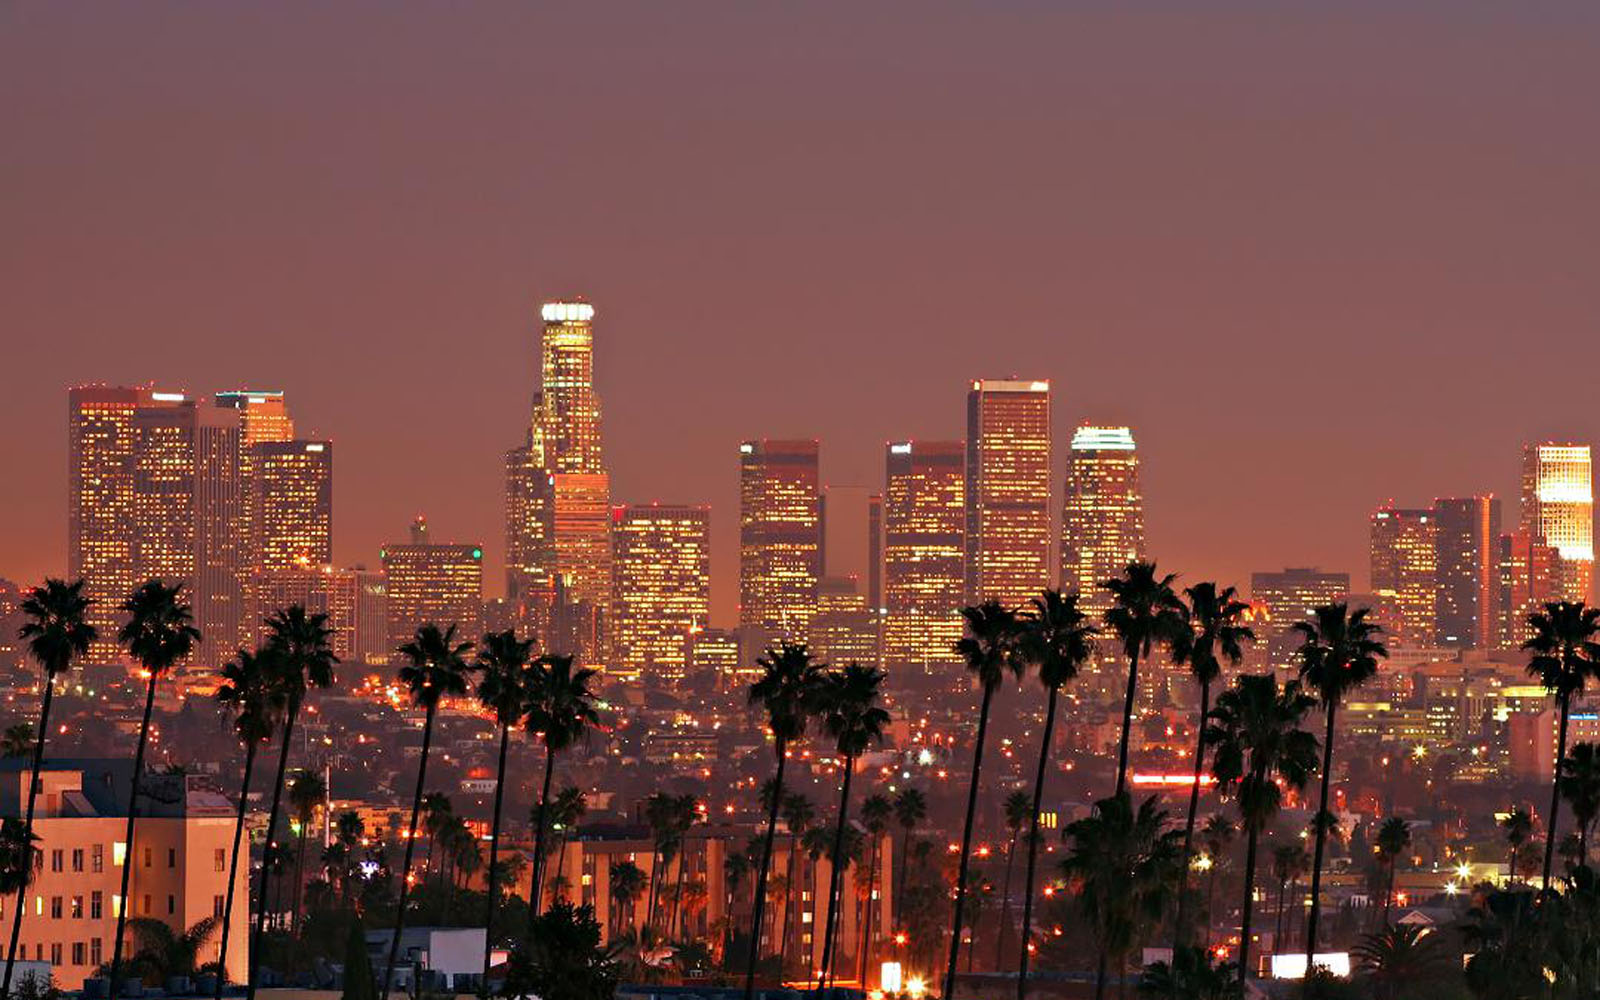 Los Angeles14 - Good Pictures Of Los Angeles - HD Wallpaper 